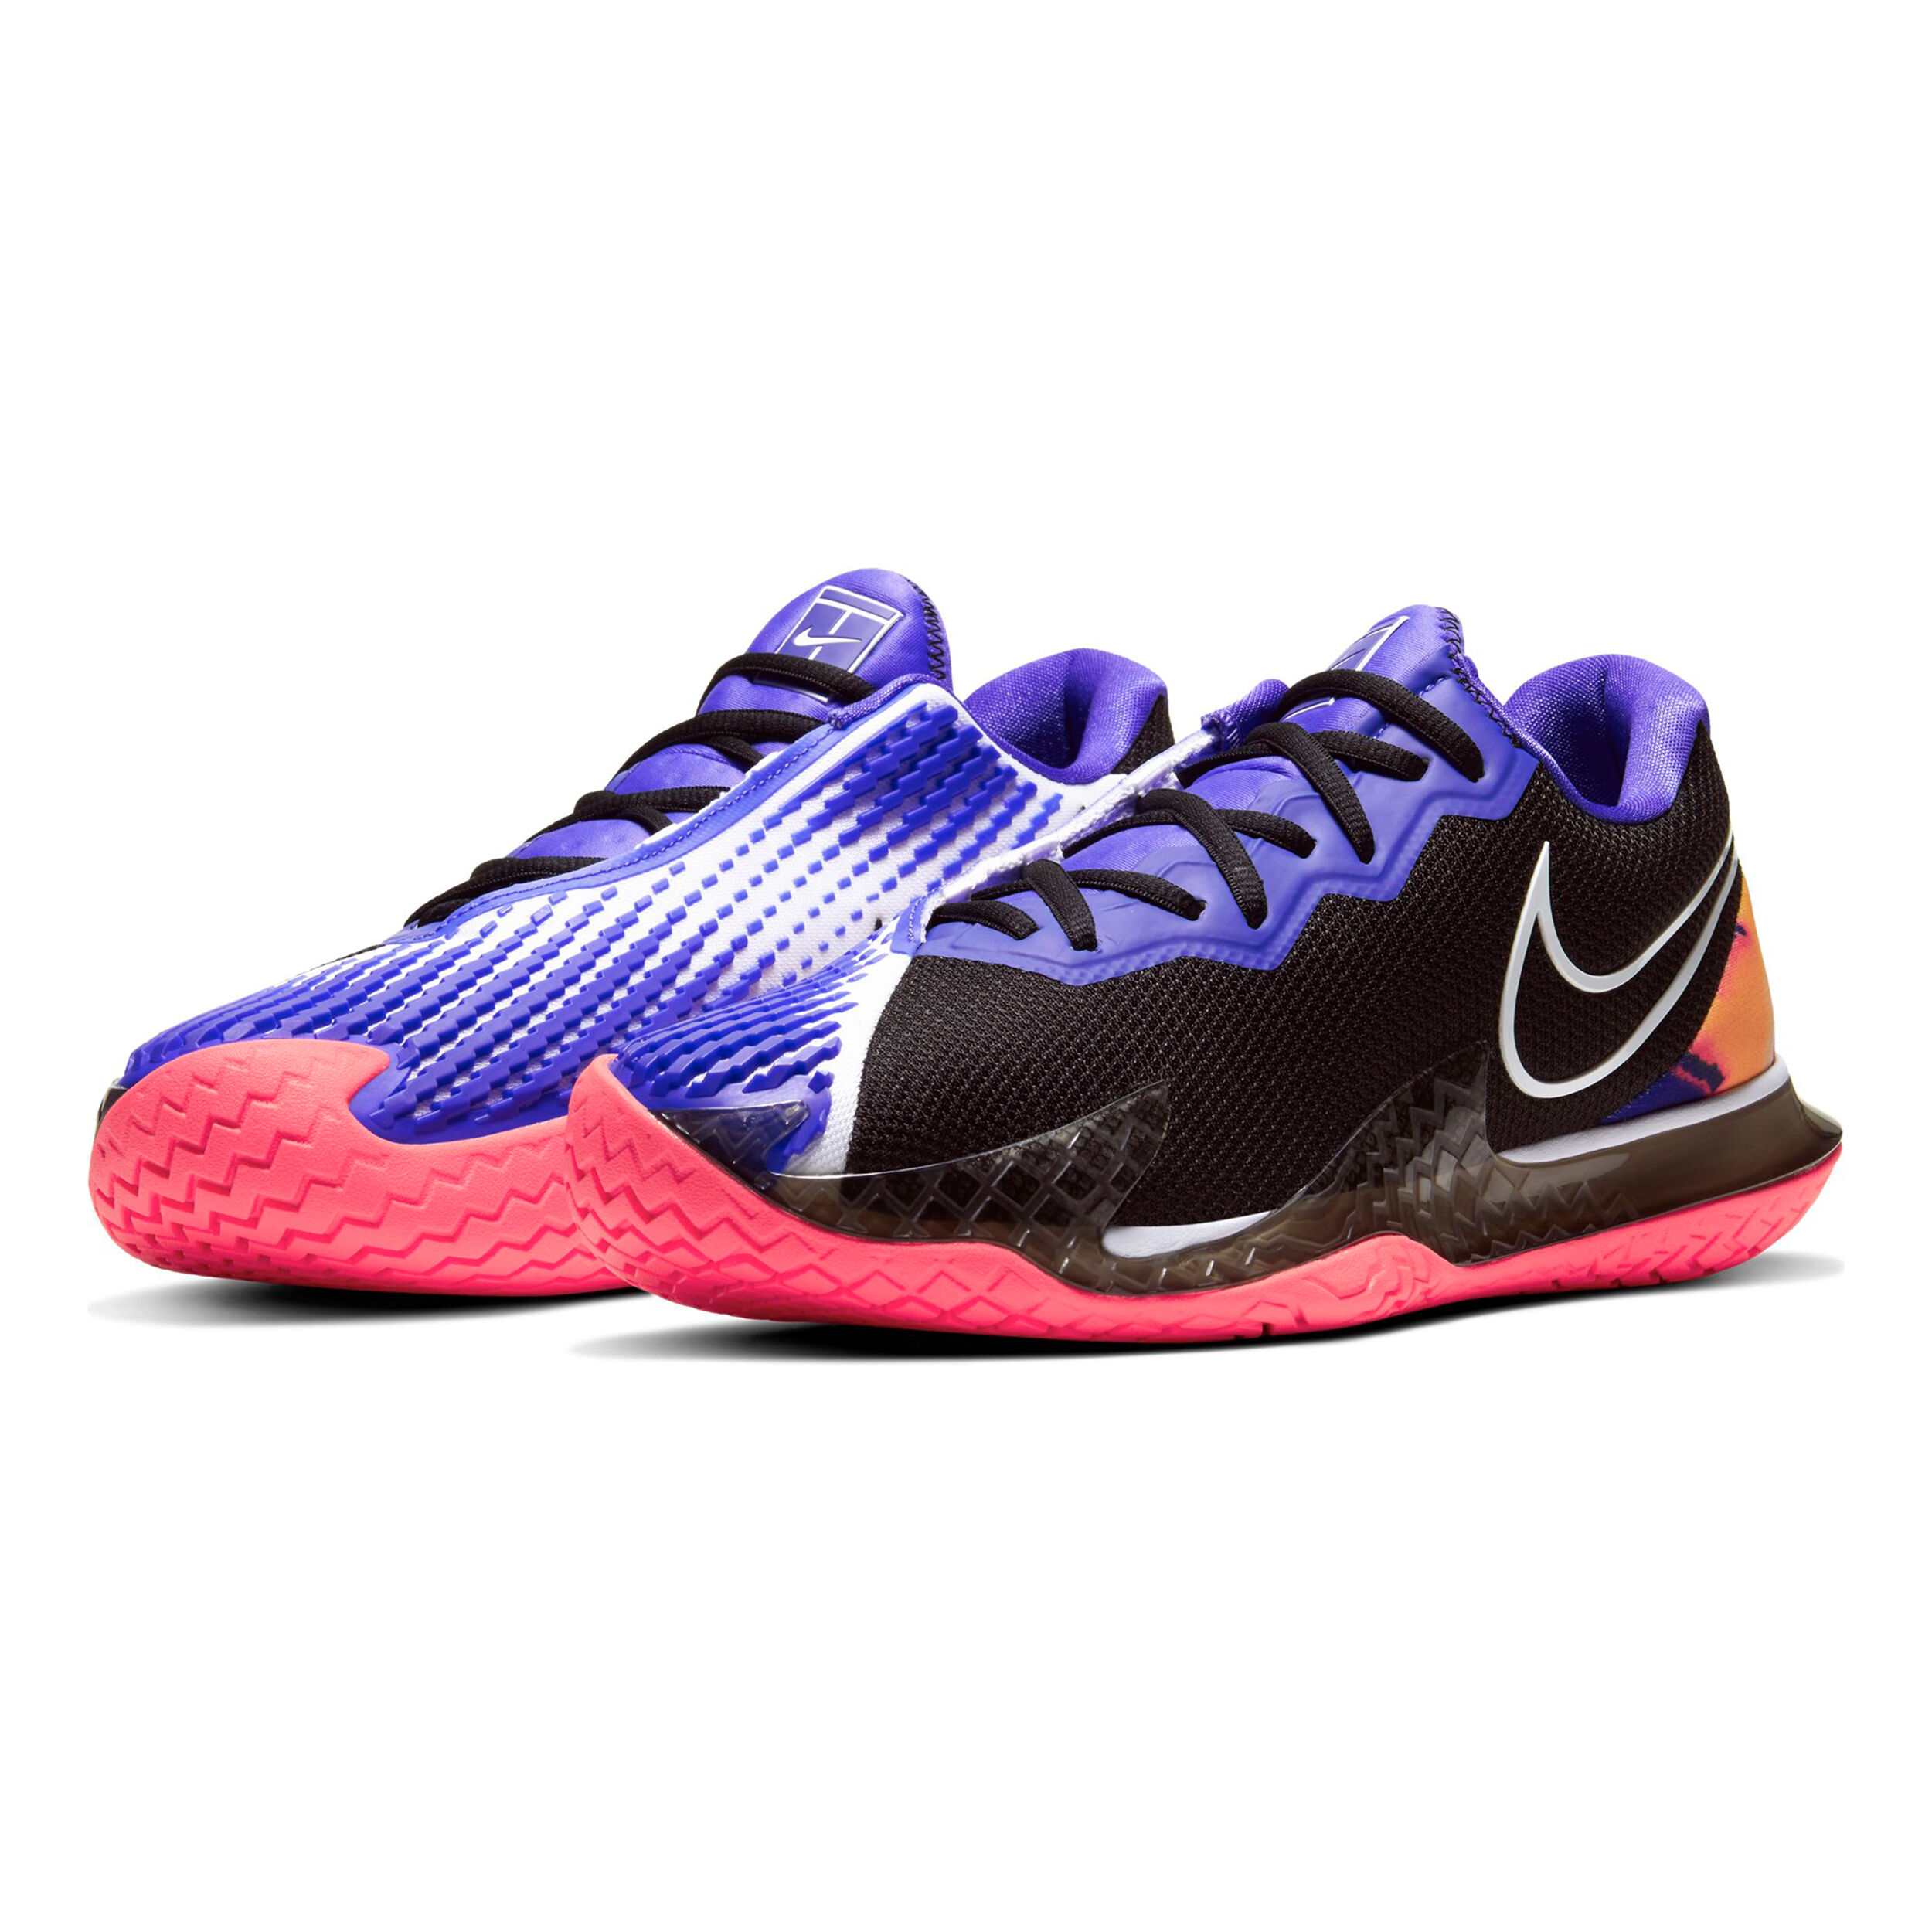 Nike Air Zoom Vapor Cage 4 Chaussures Toutes Surfaces Hommes ...